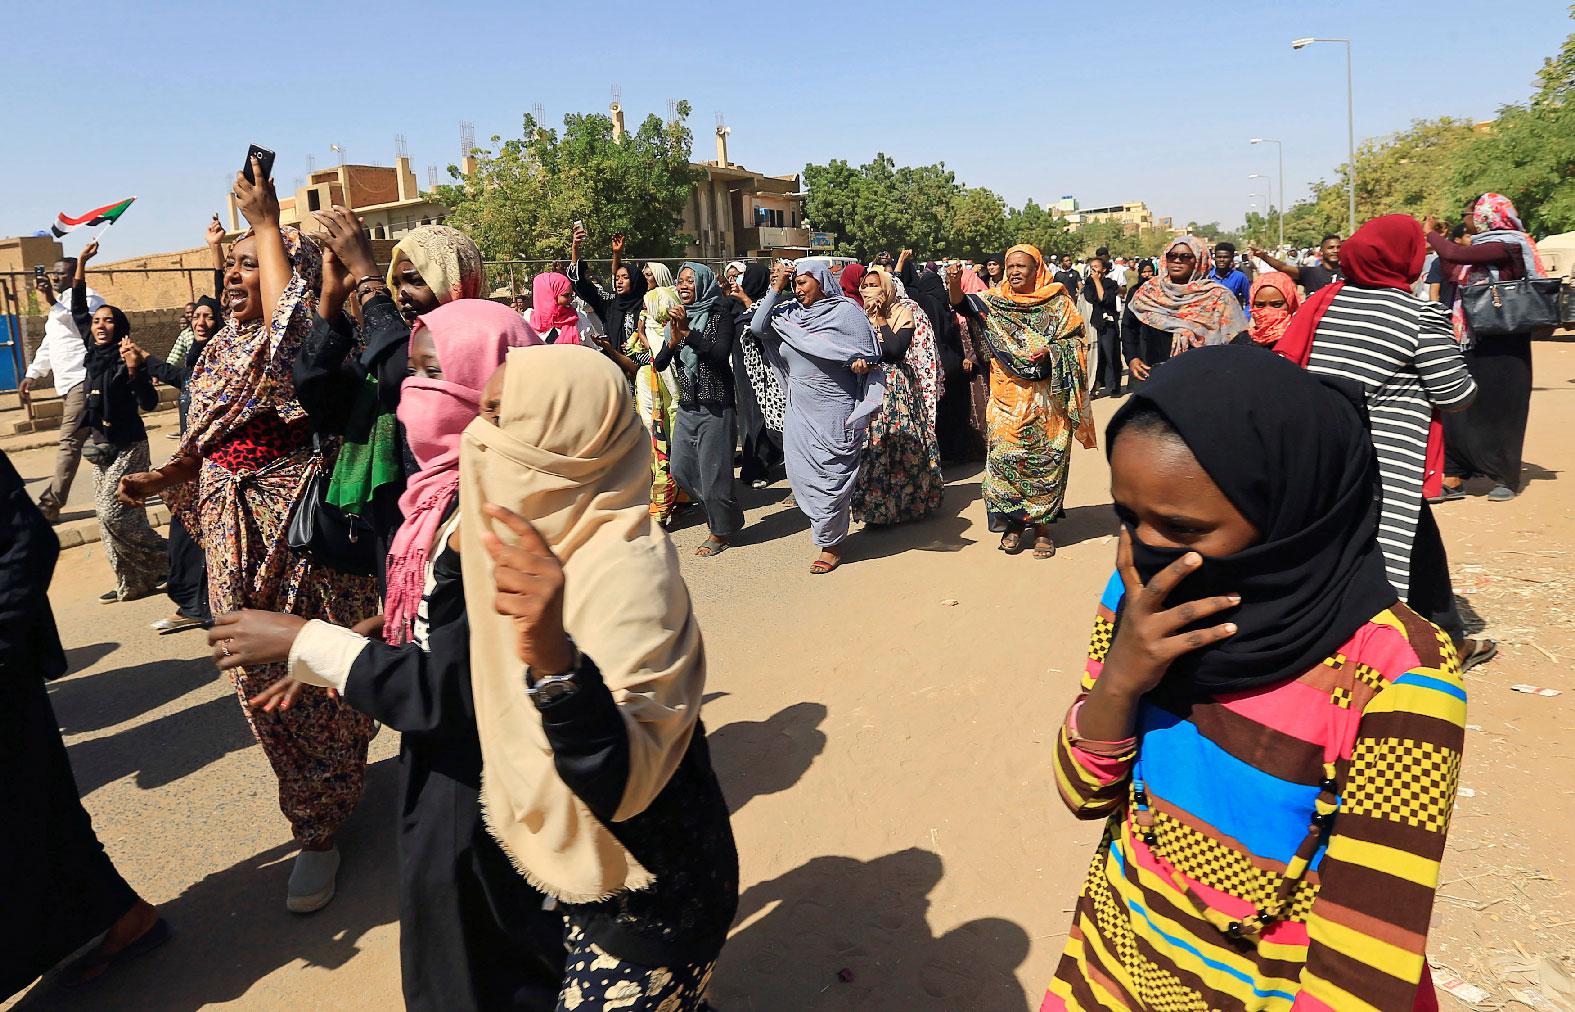 Sudanese women chant slogans near the home of a demonstrator who died of a gunshot wound sustained during anti-government protests in Khartoum, Sudan January 18, 2019.